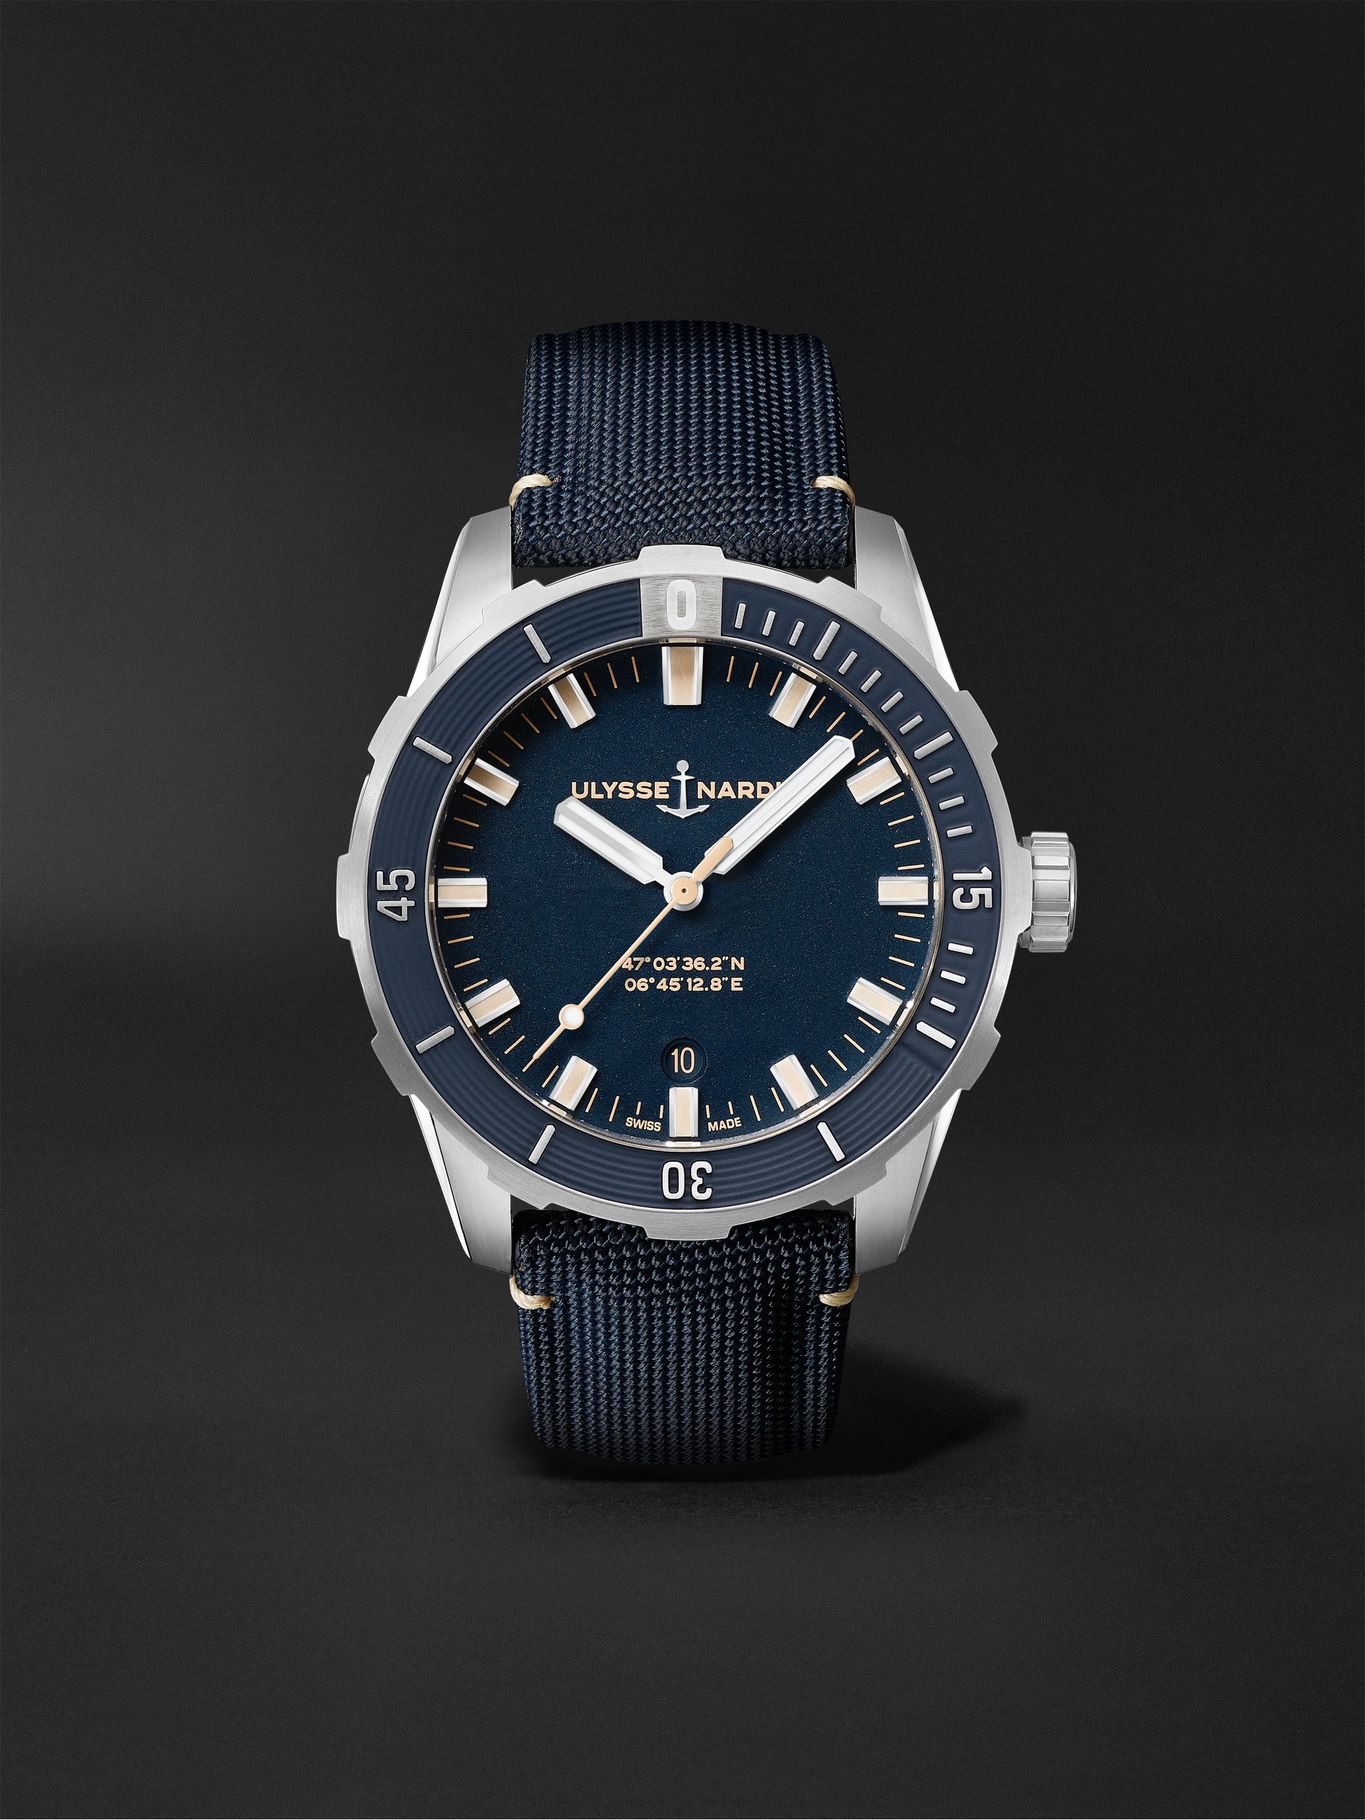 Ulysse Nardin Diver Automatic 42mm Stainless Steel And Webbing Watch, Ref. No. 8163-175/93 In Black